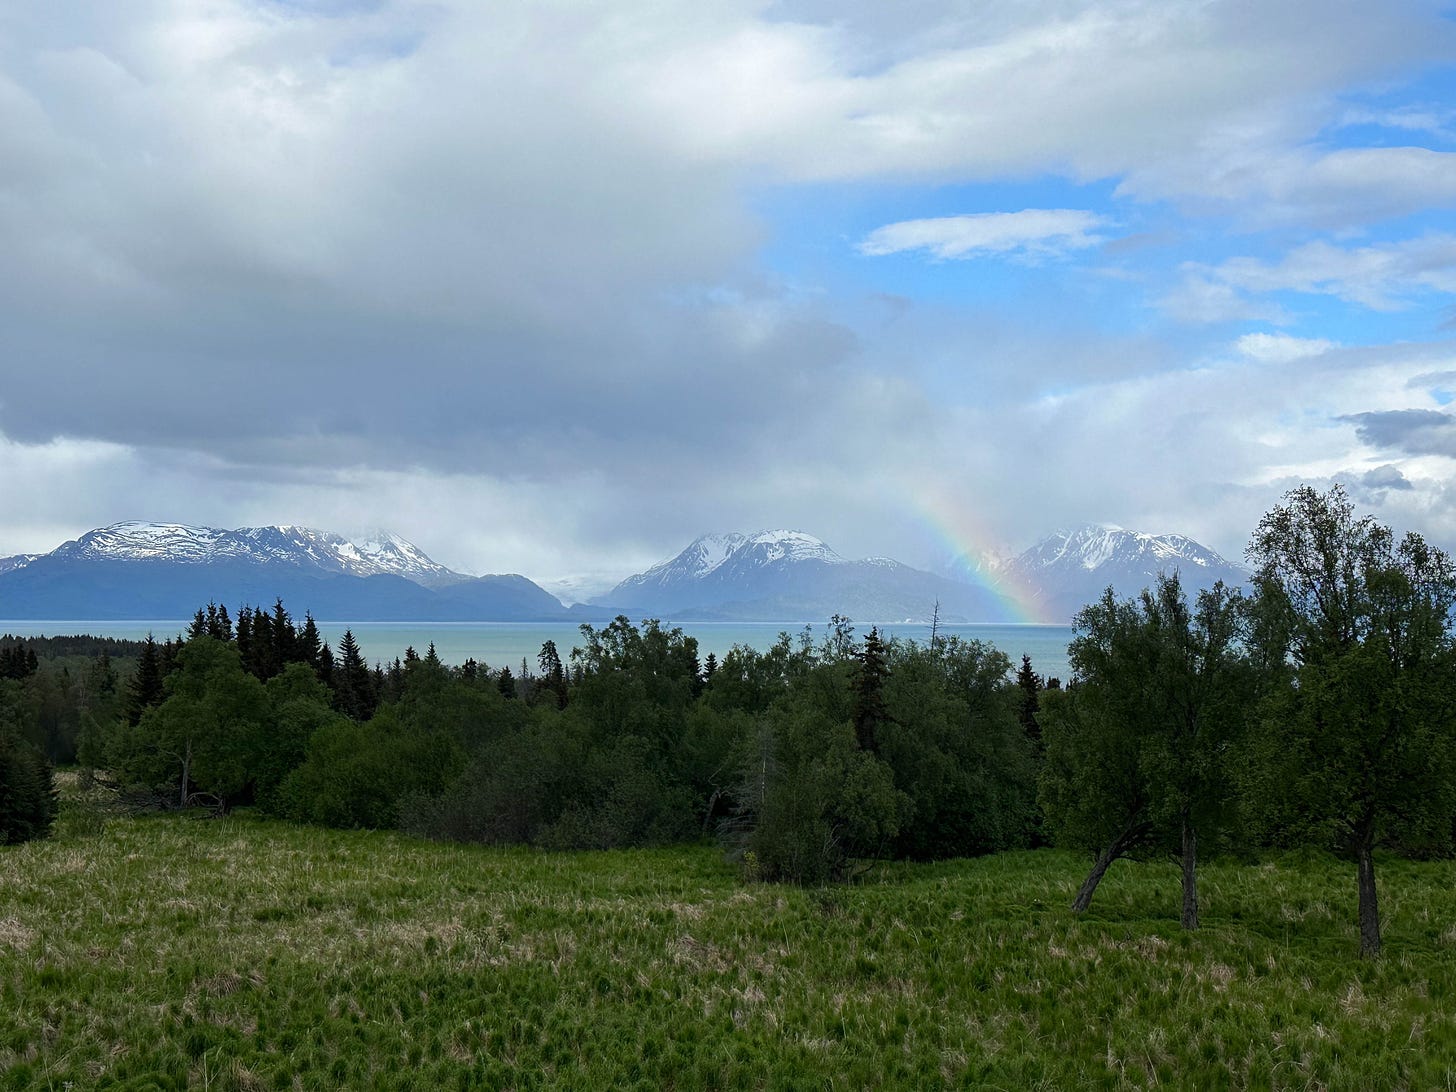 Mountain scene with rainbow coming from cloudy sky.